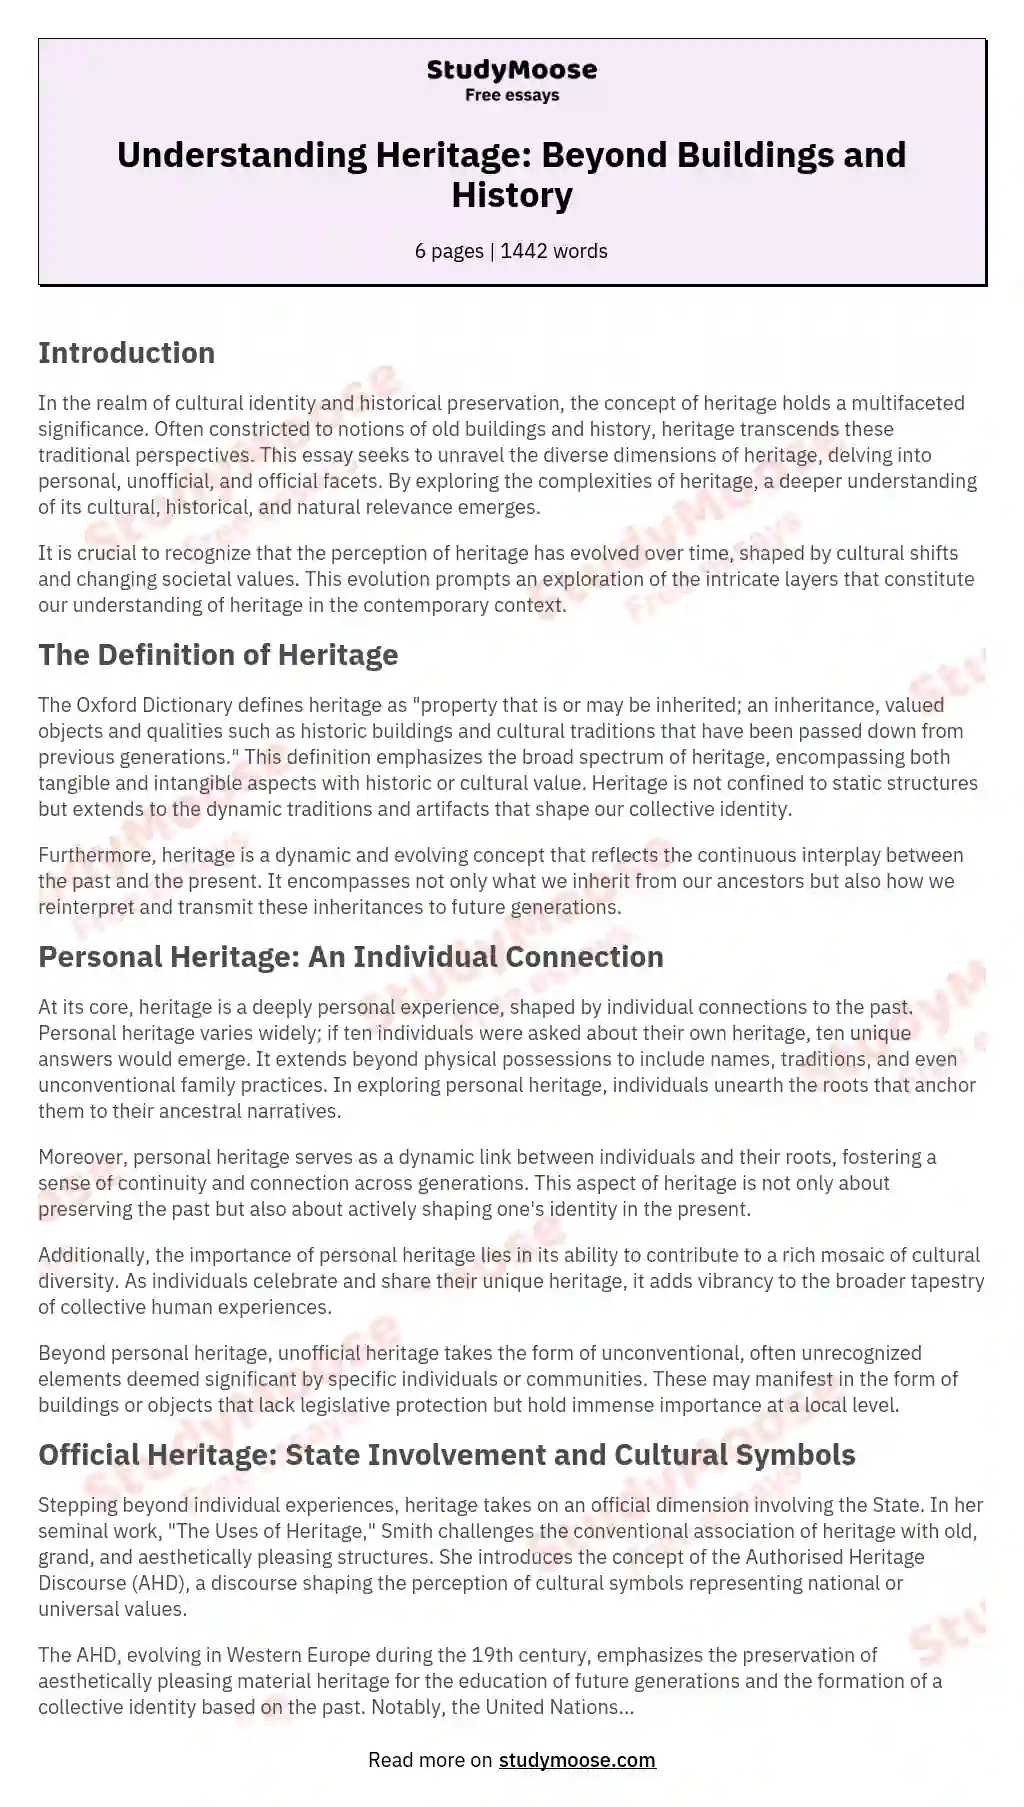 thesis topic related to heritage